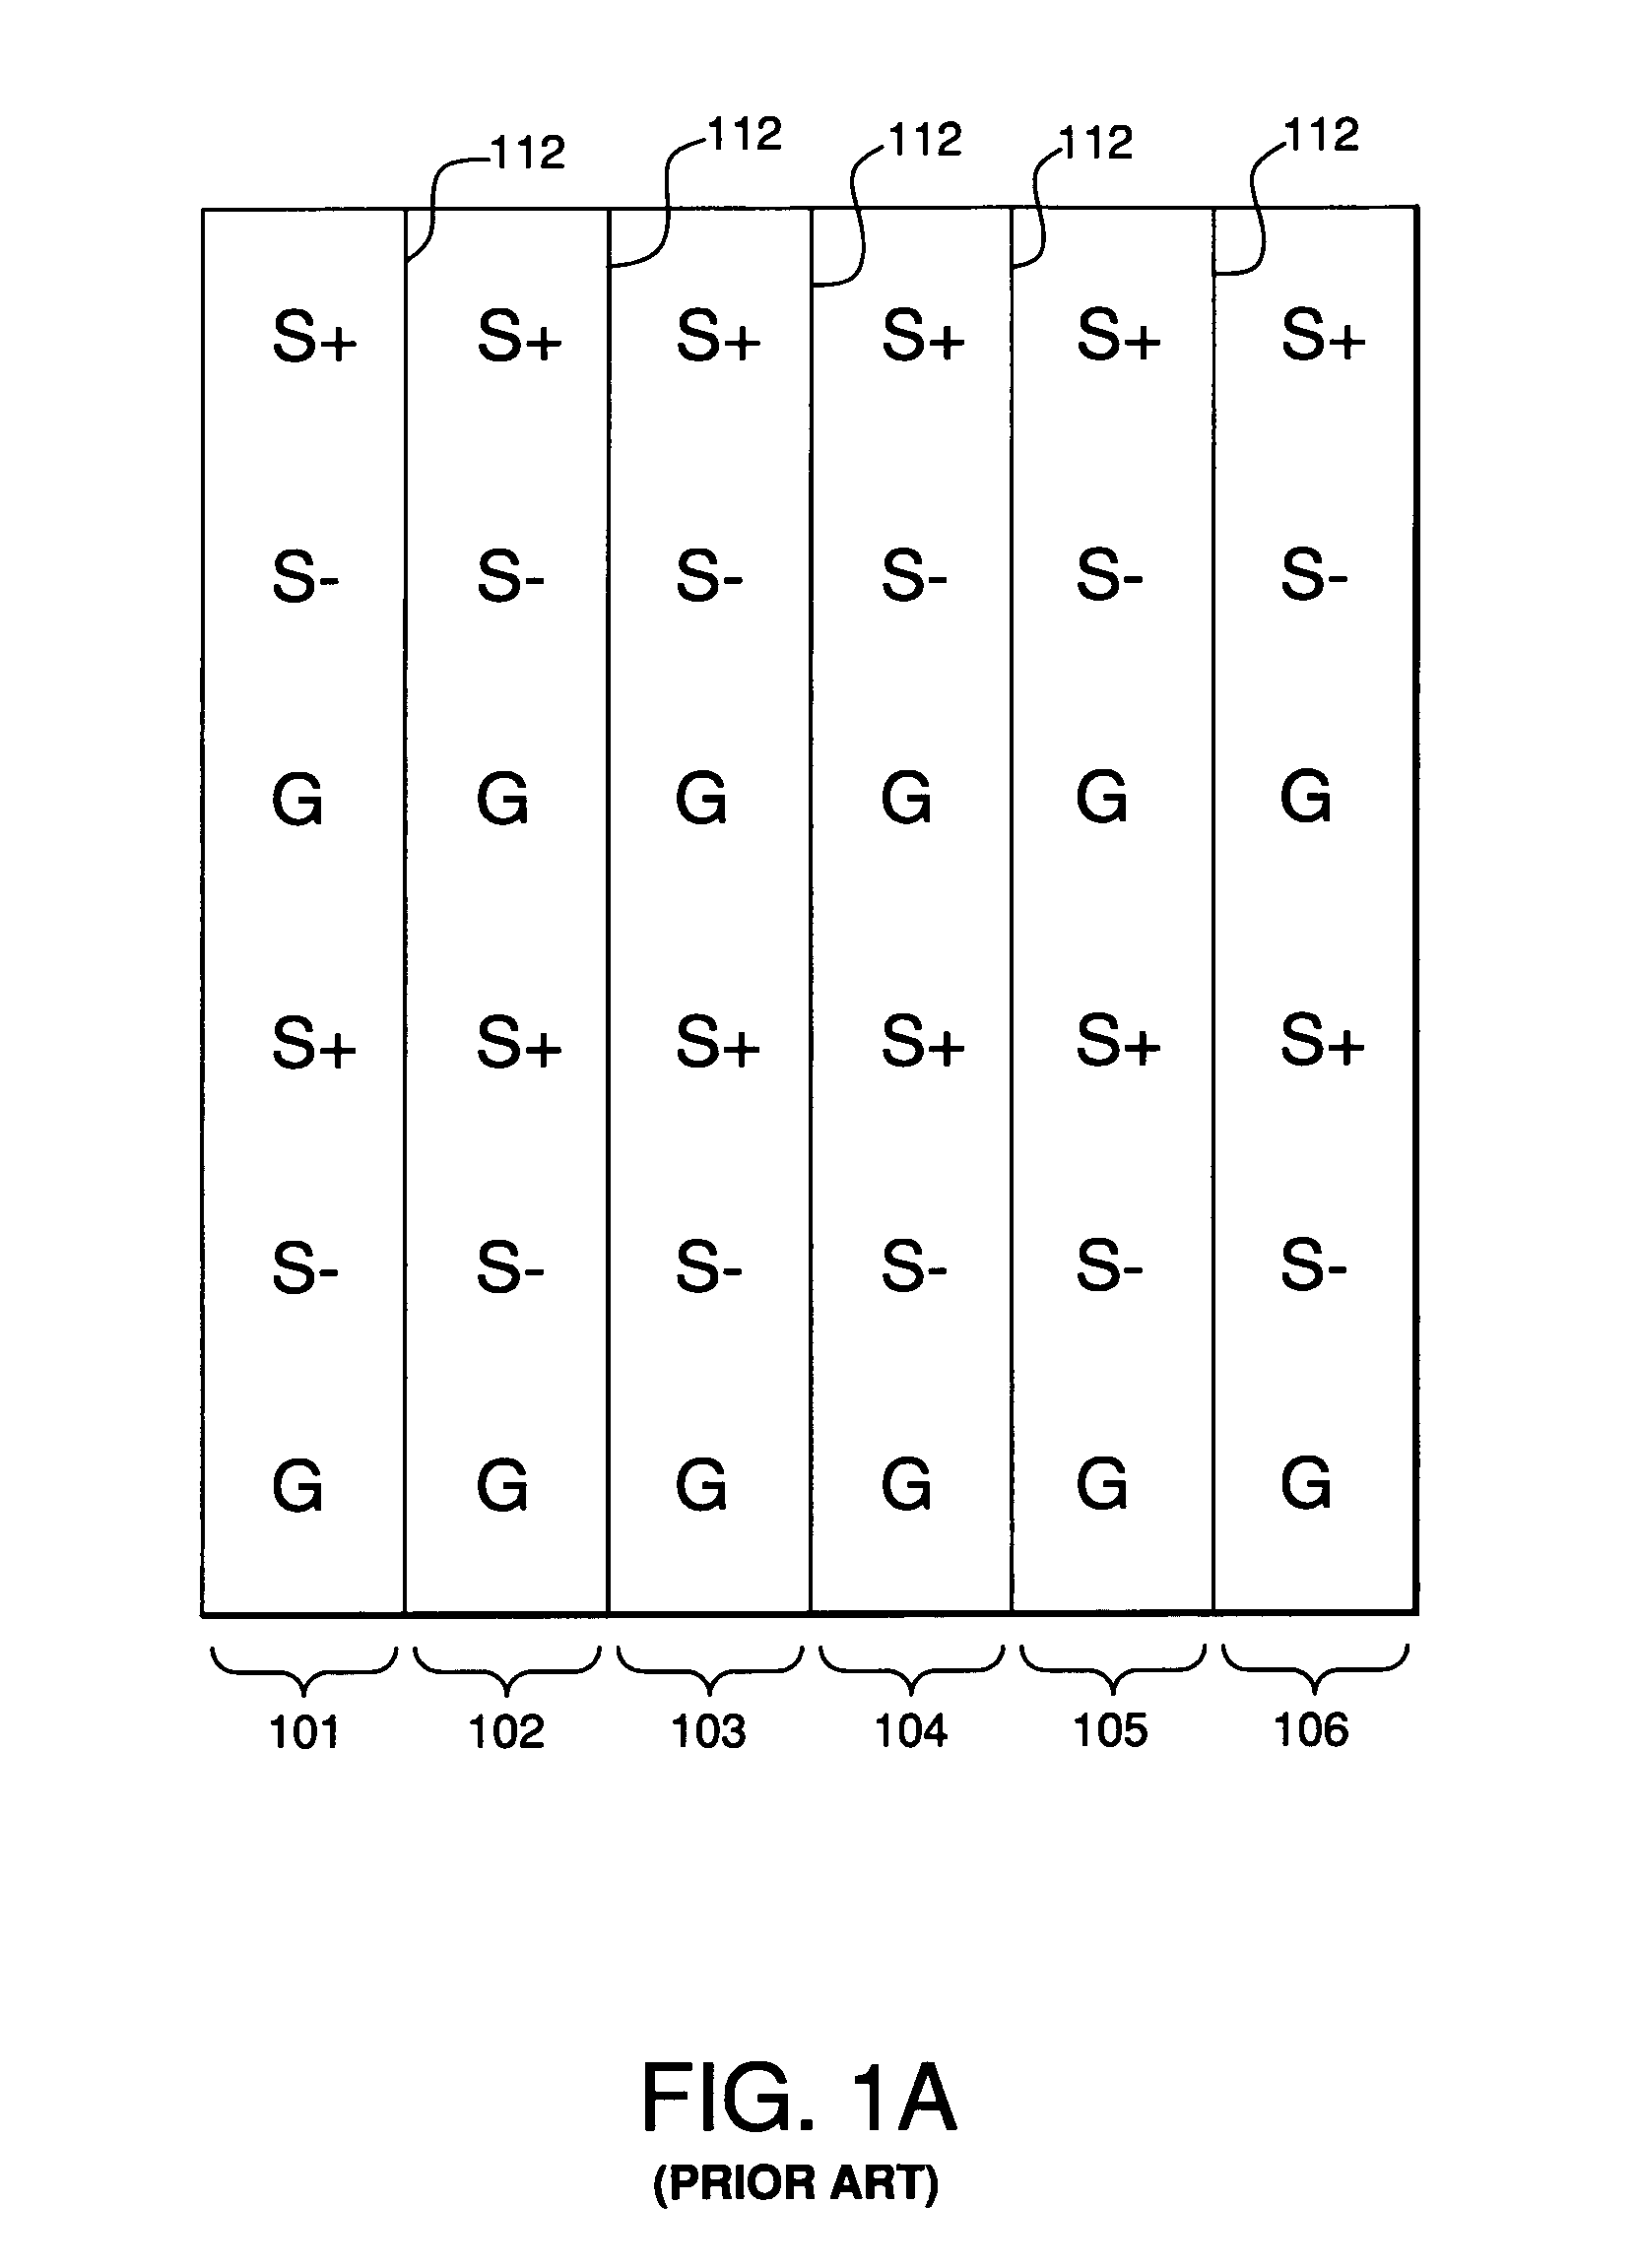 Electrical connectors having contacts that may be selectively designated as either signal or ground contacts